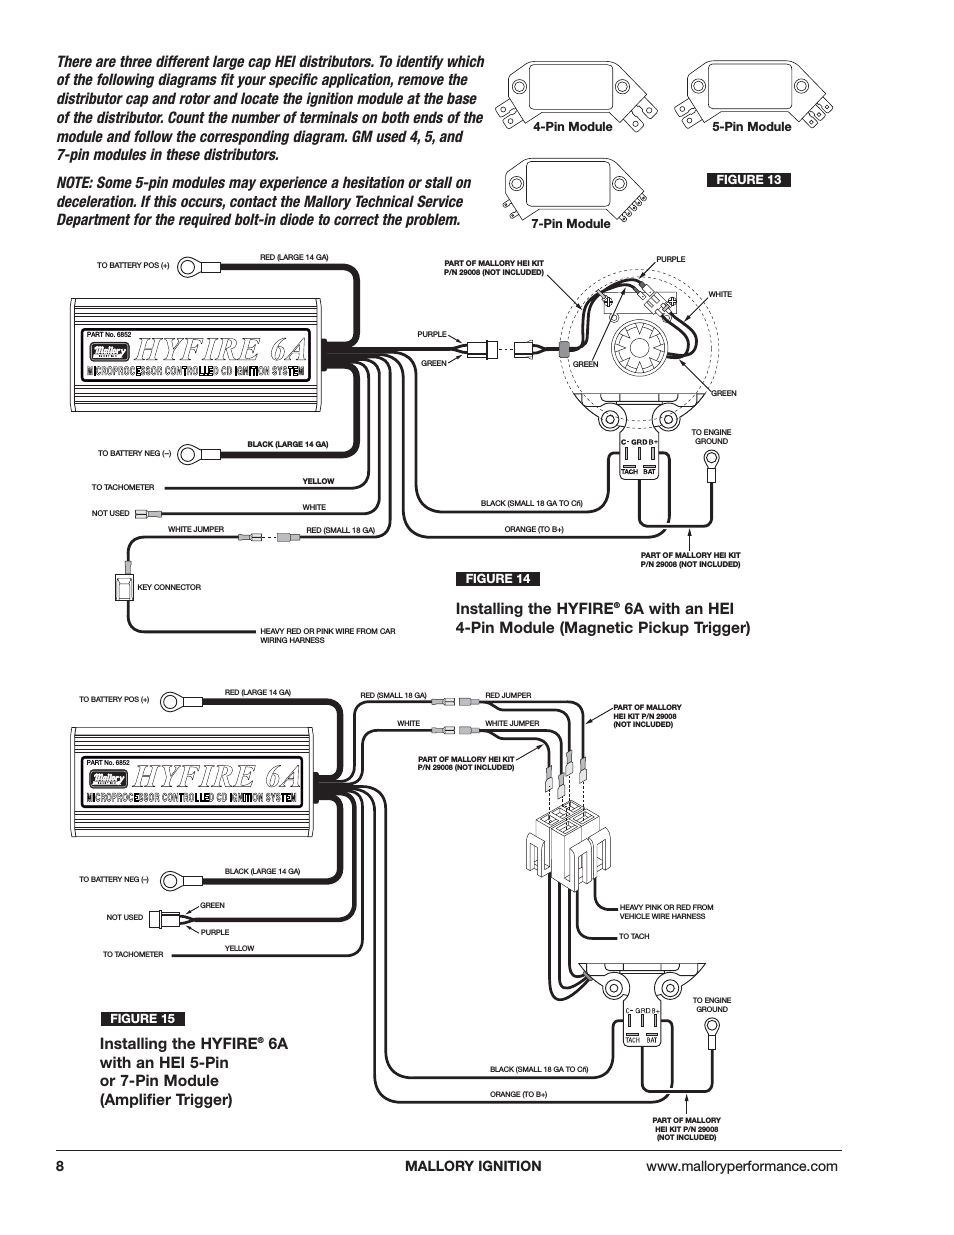 Mallory Ignition Wiring Diagram | Wiring Diagram